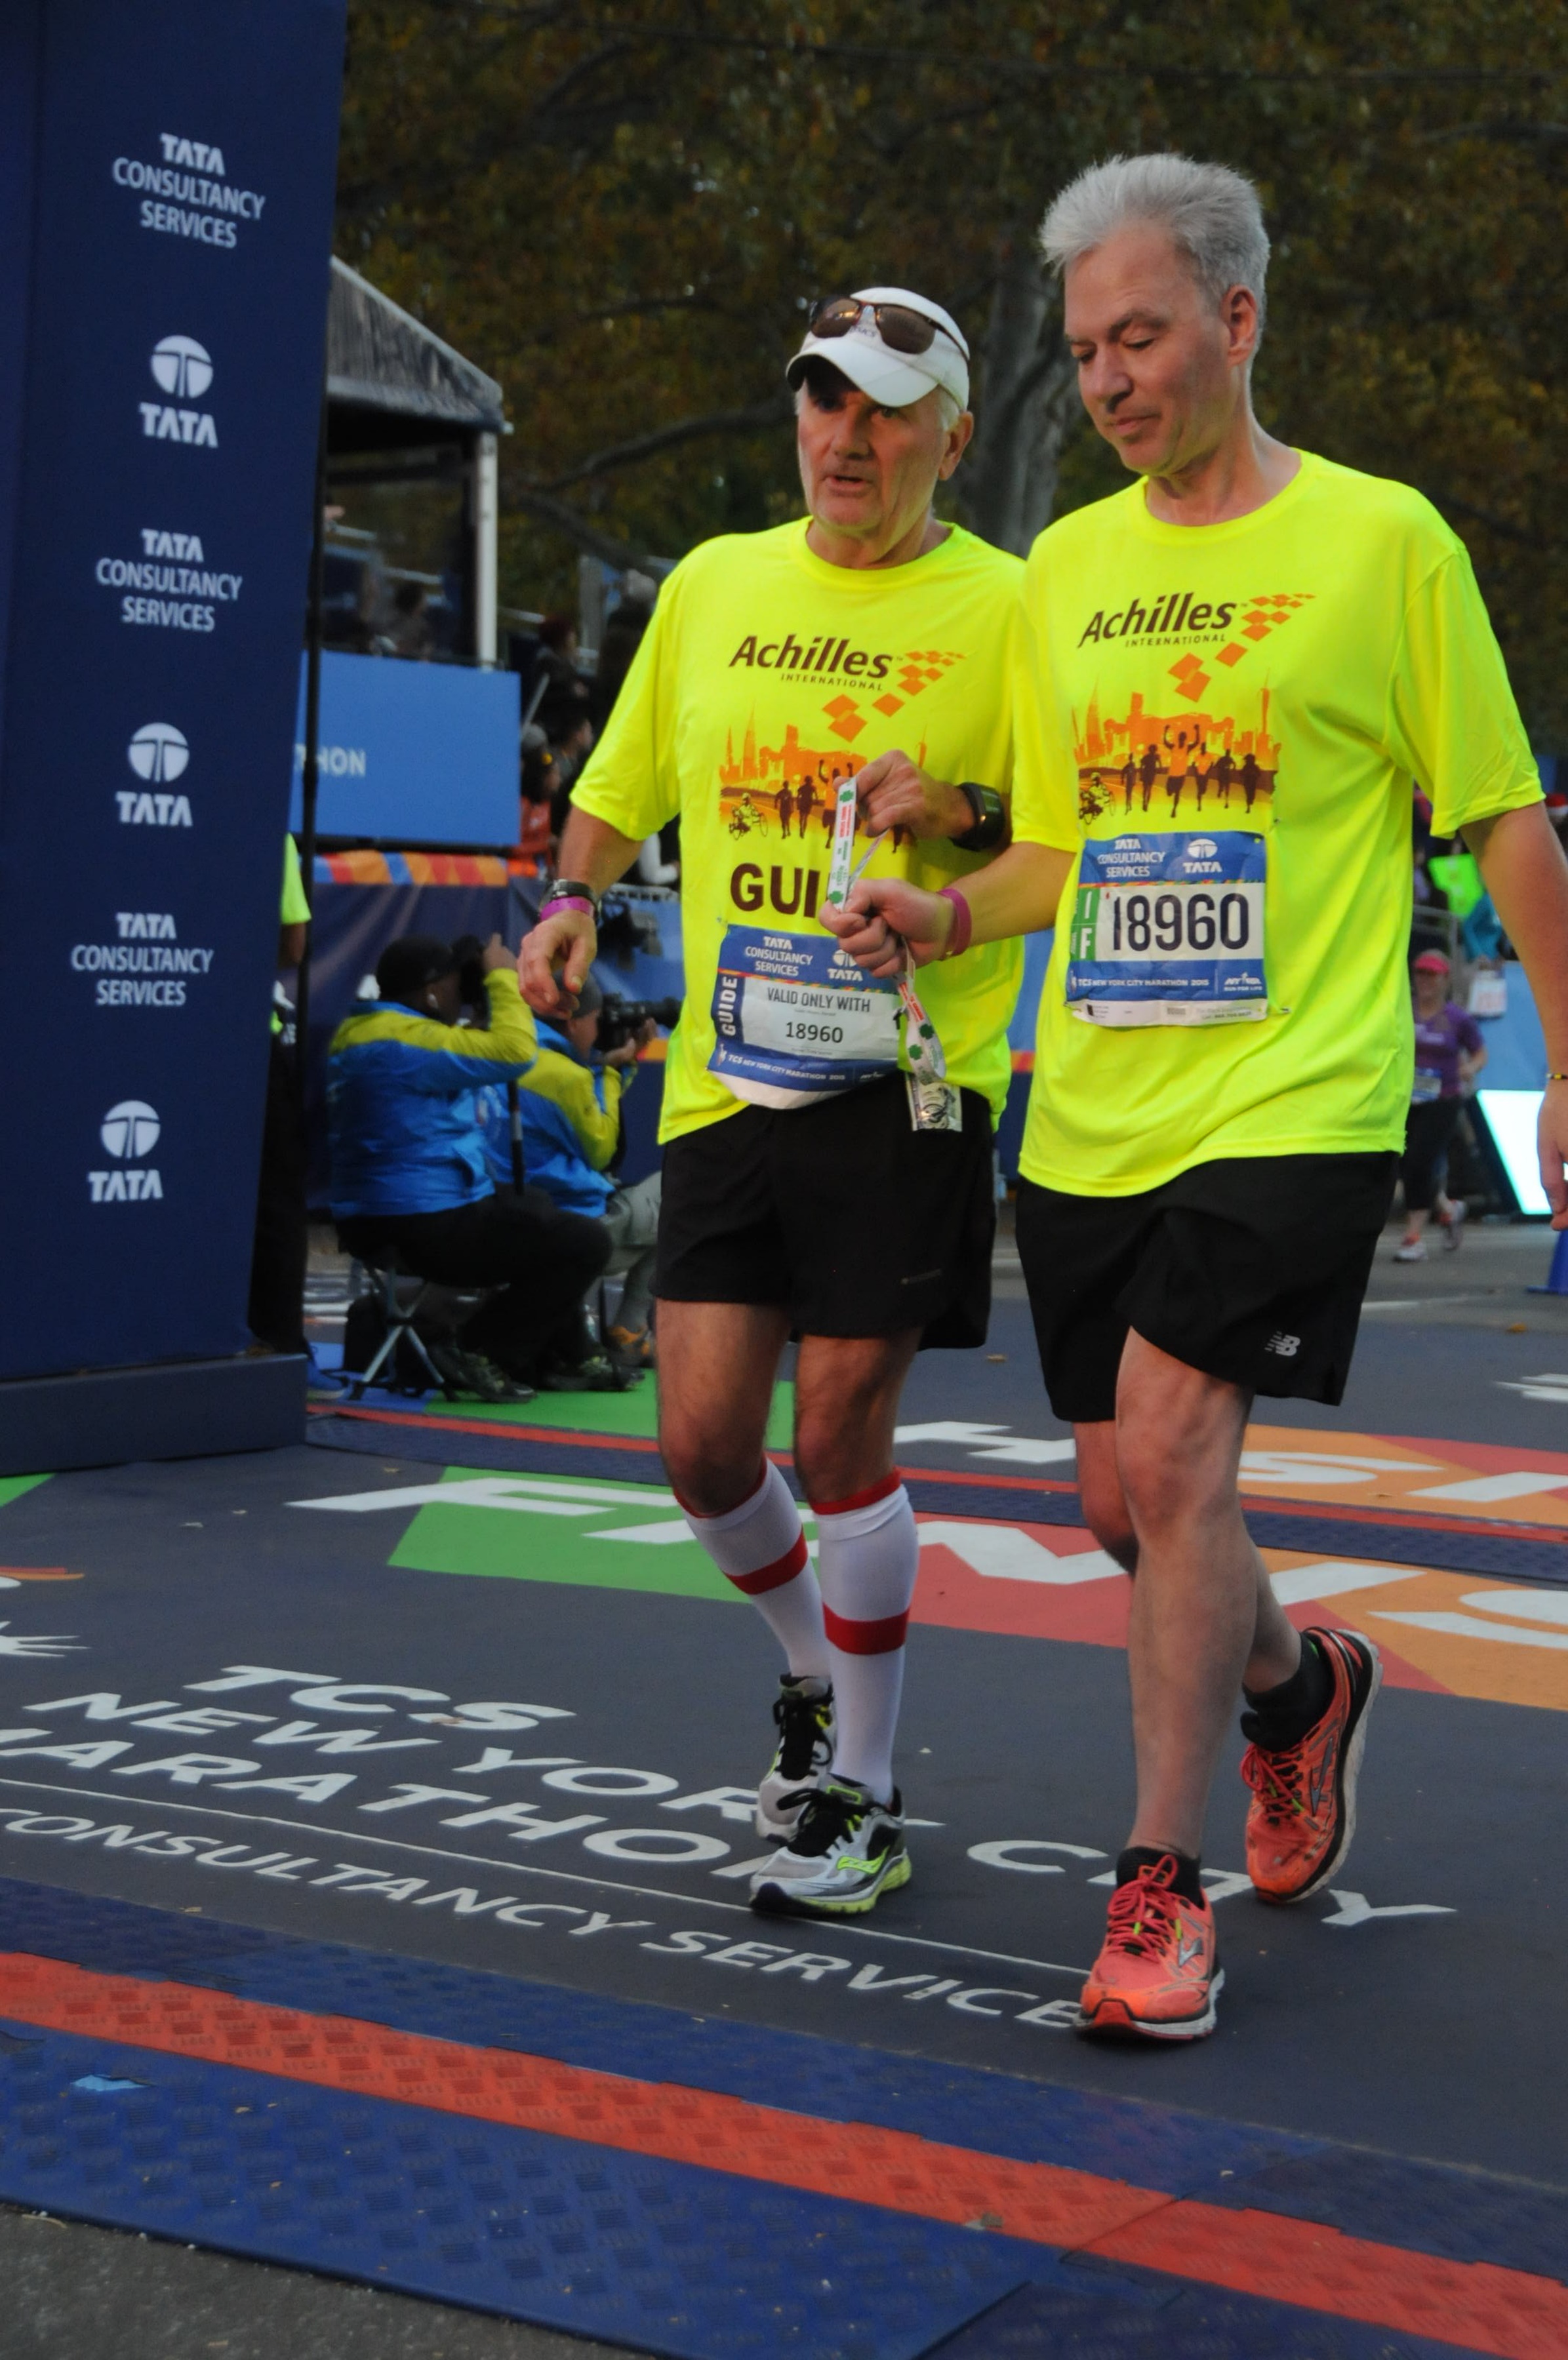 A male volunteer and a visually impaired athlete running together